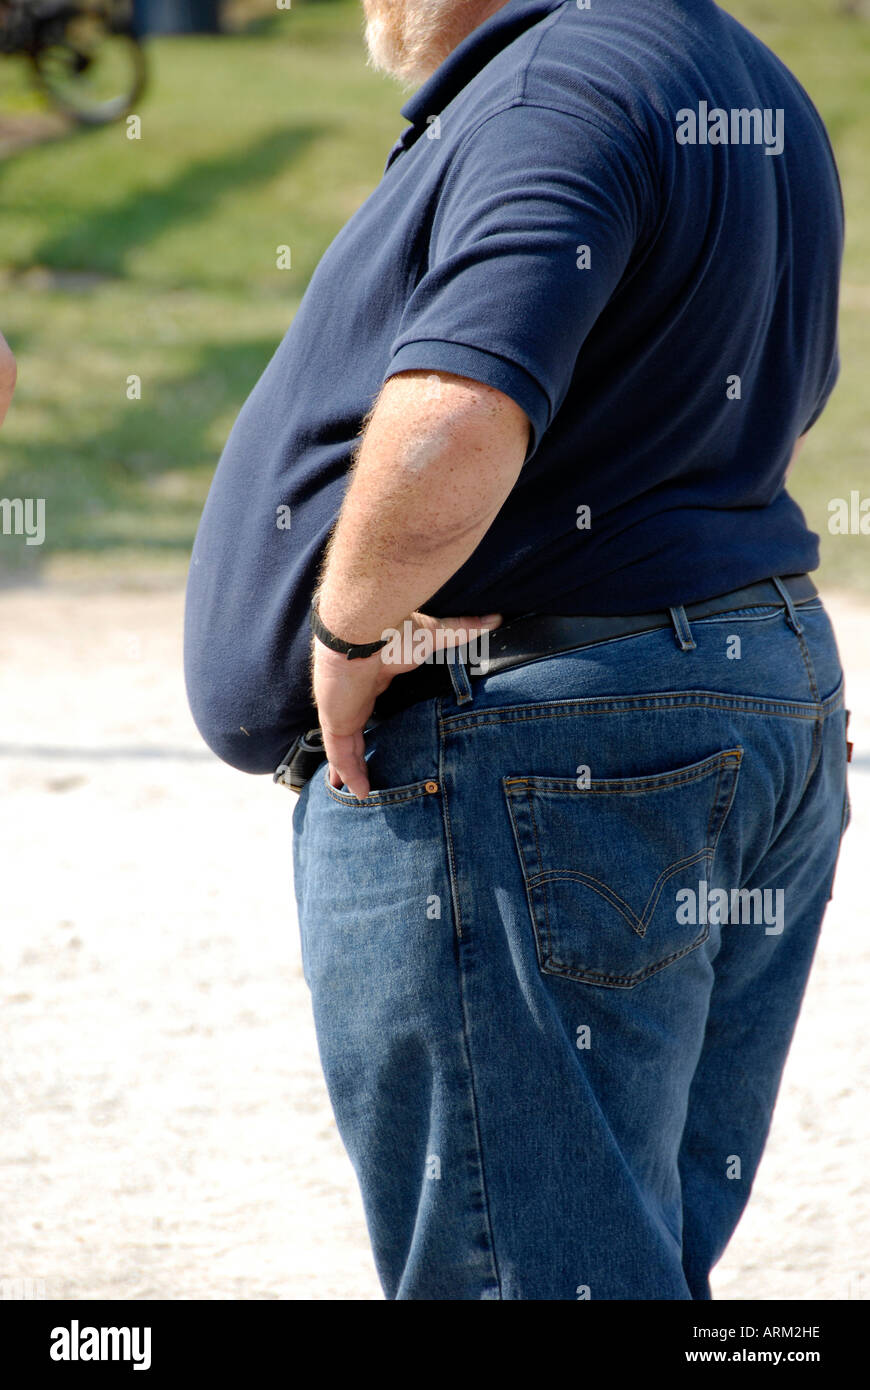 The stomach of a fat man Stock Photo - Alamy